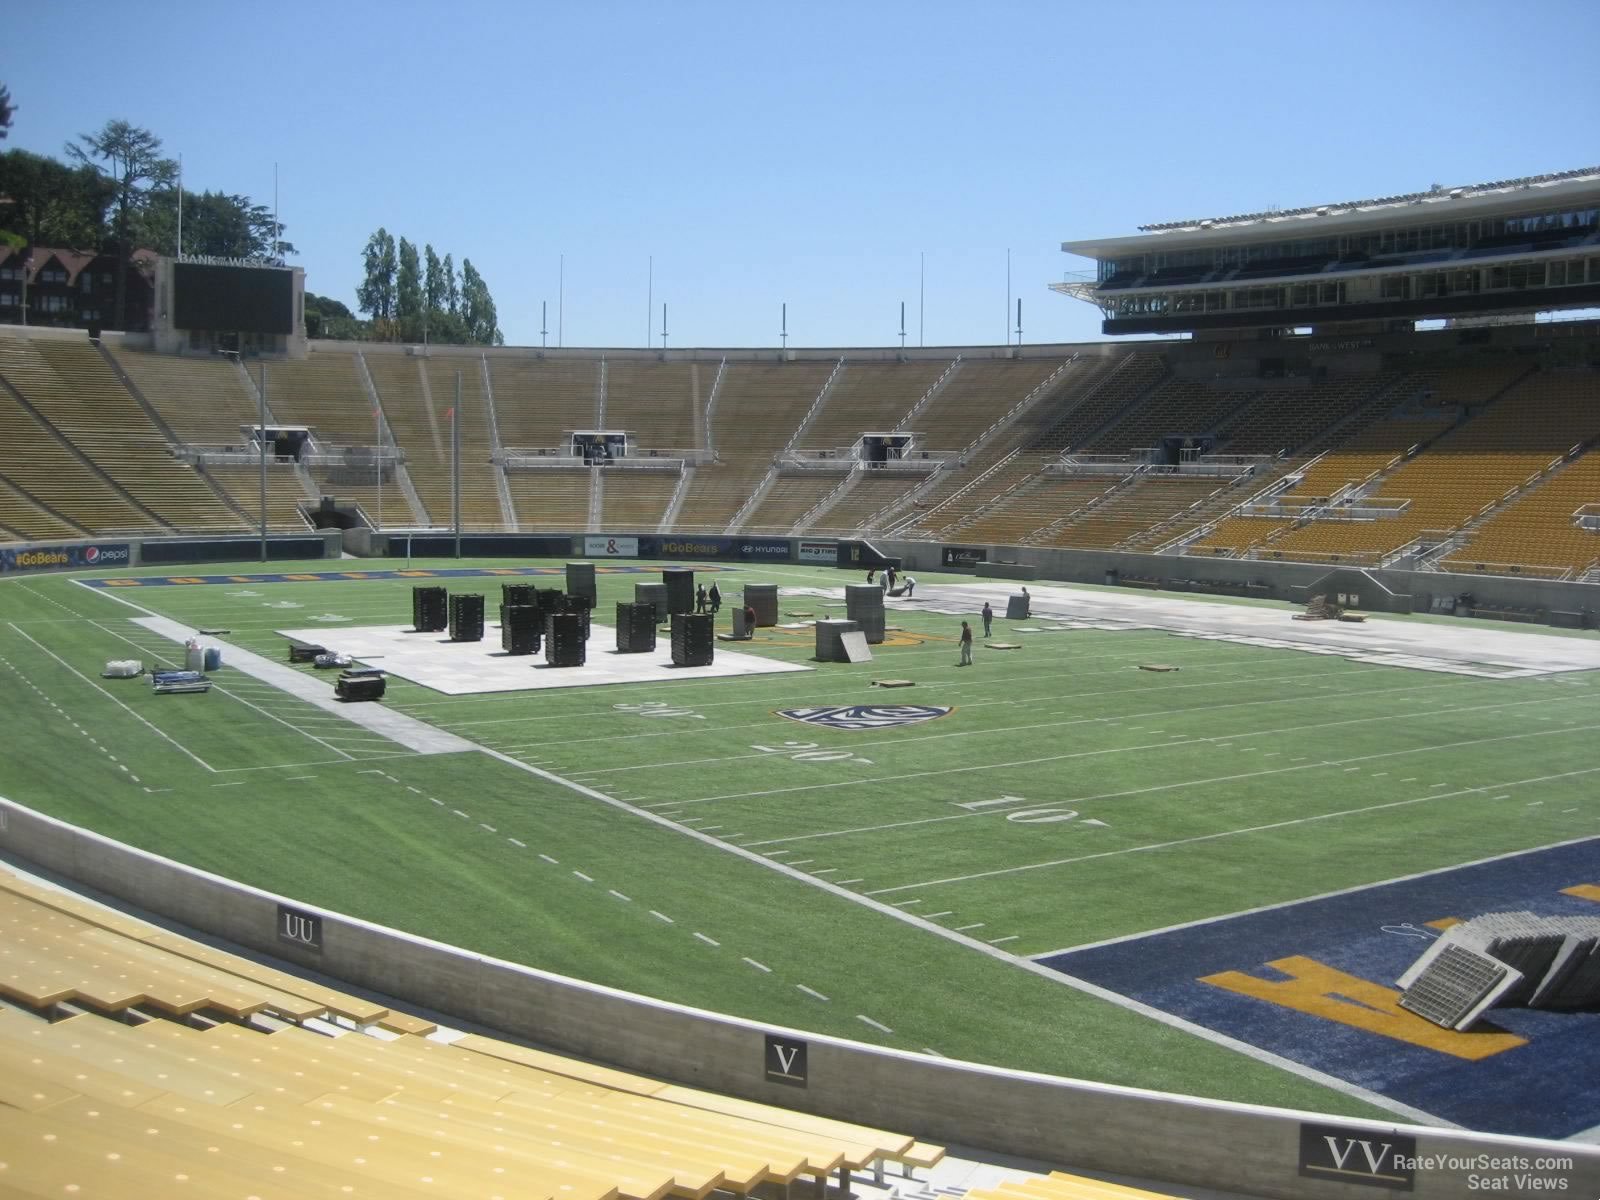 section vv, row 22 seat view  - memorial stadium (cal)